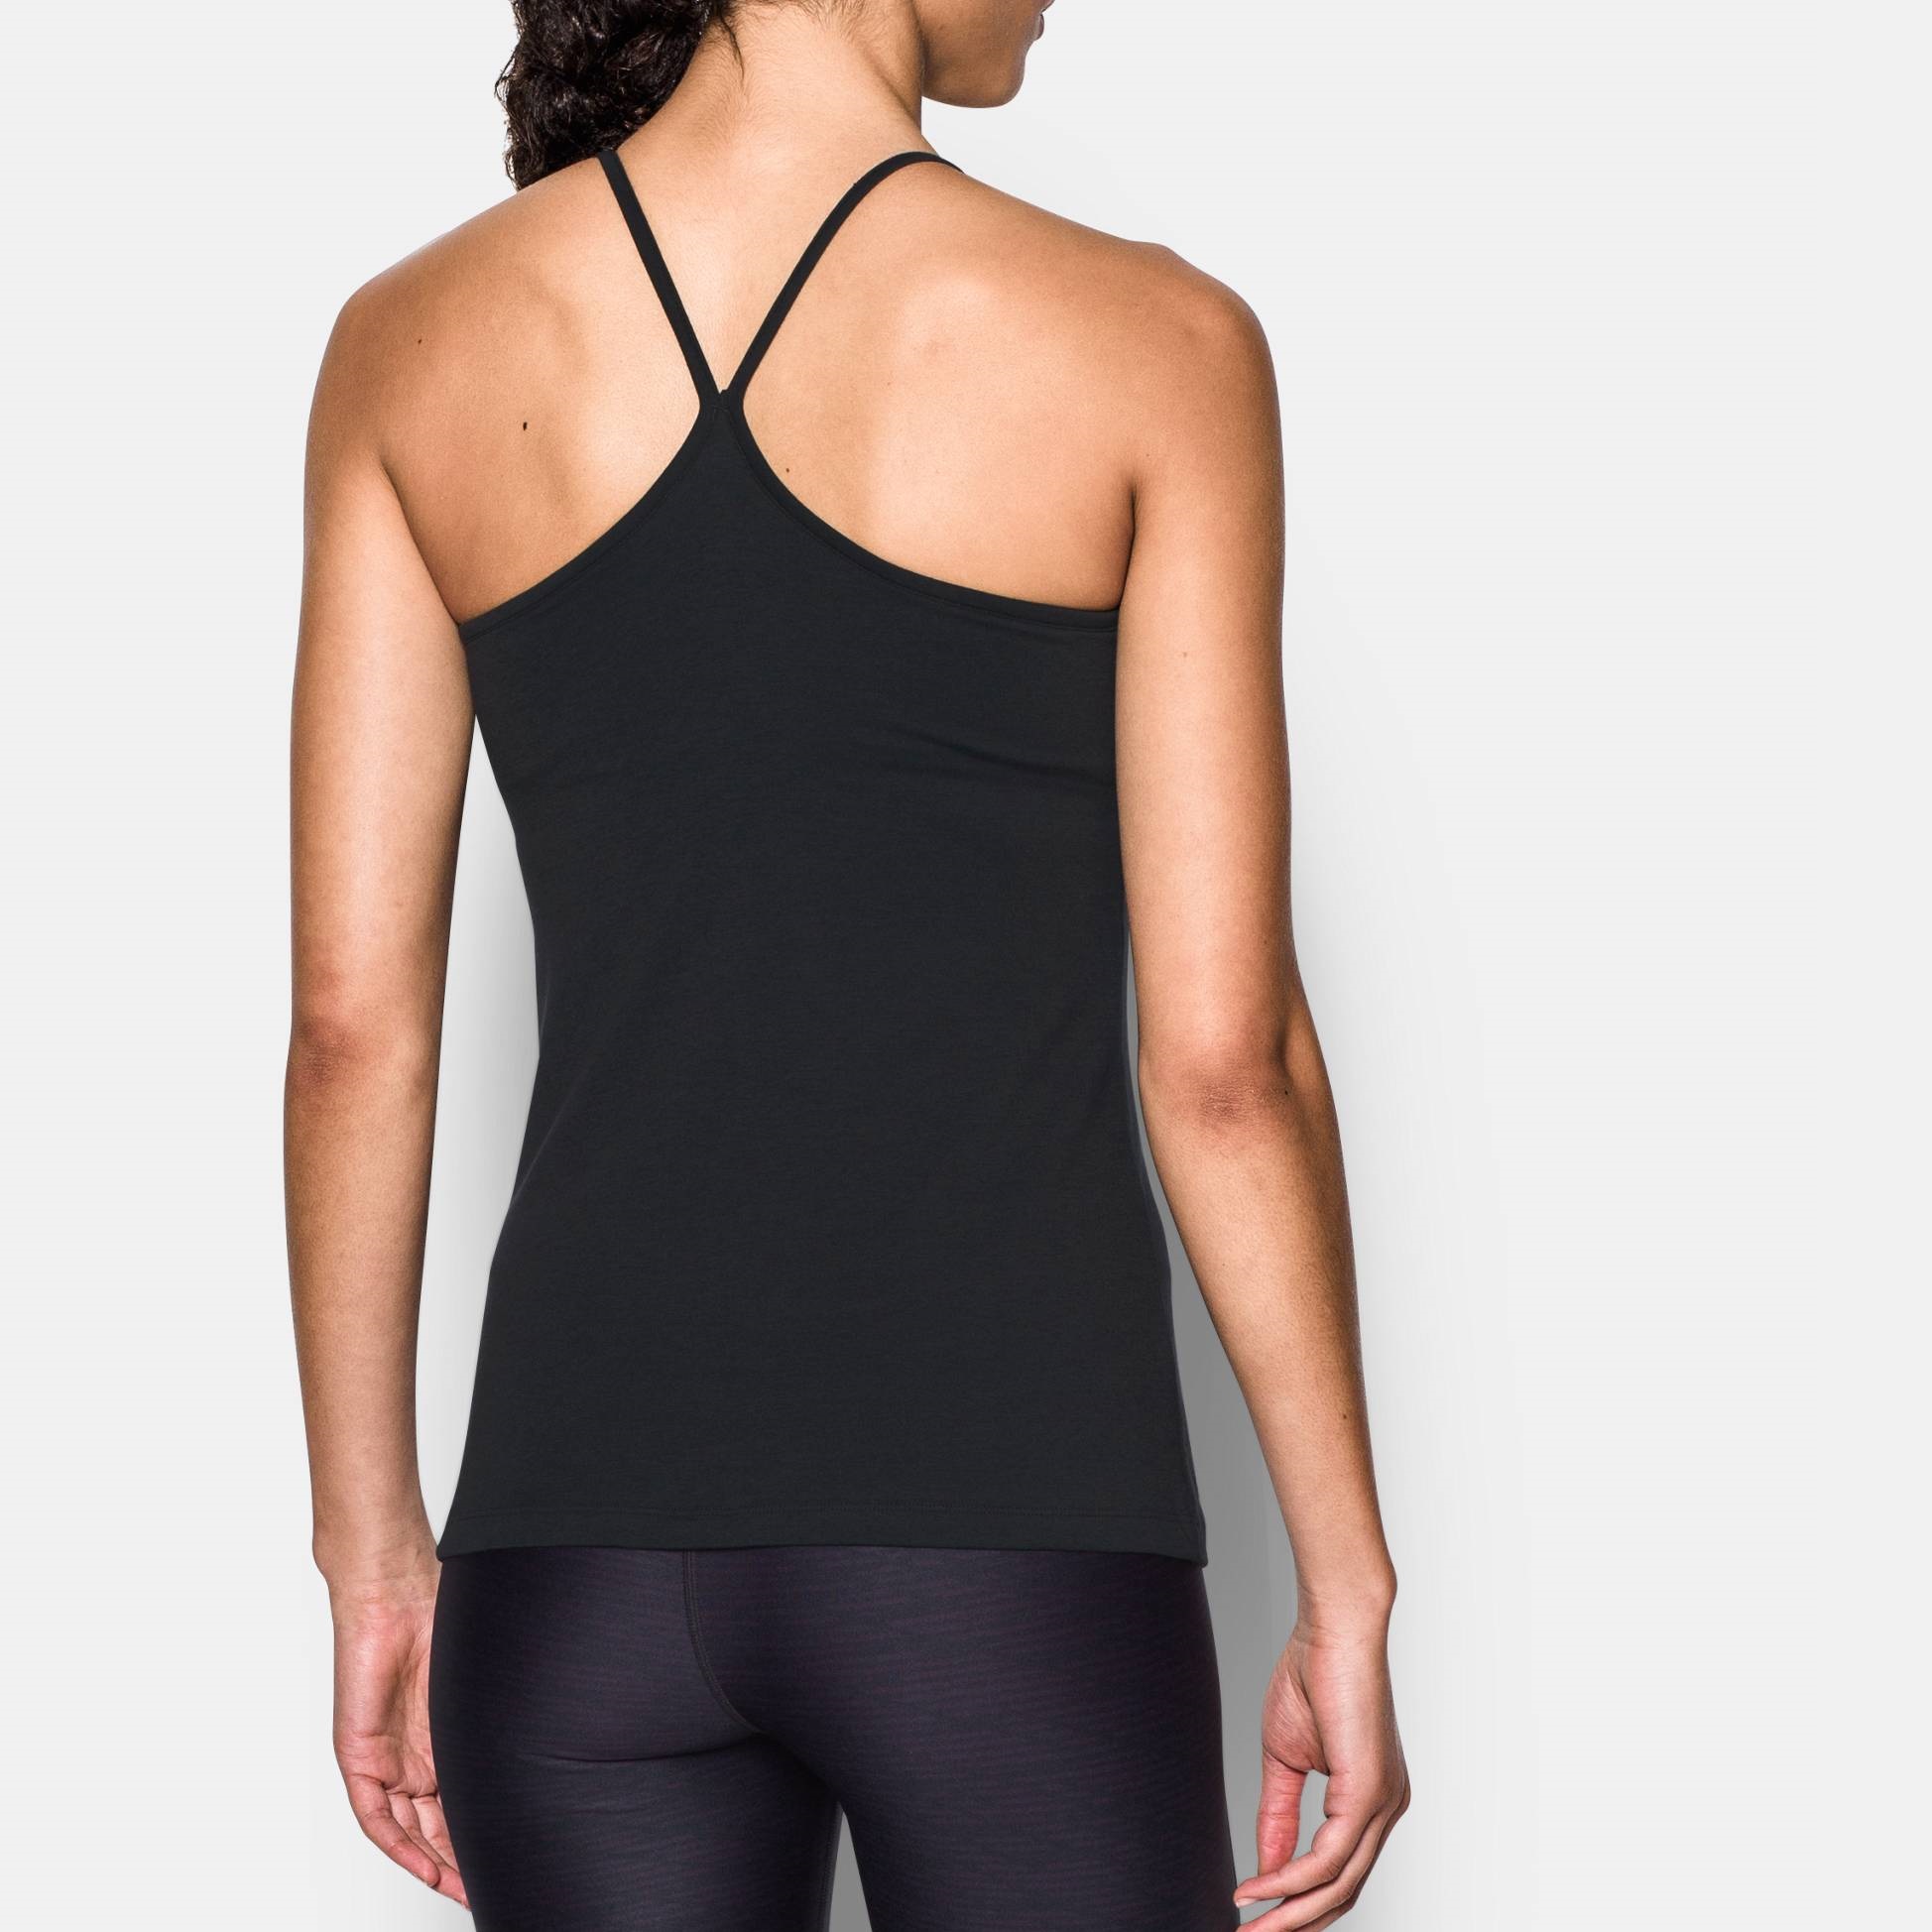  -  under armour Rest Day Cami Tank Top